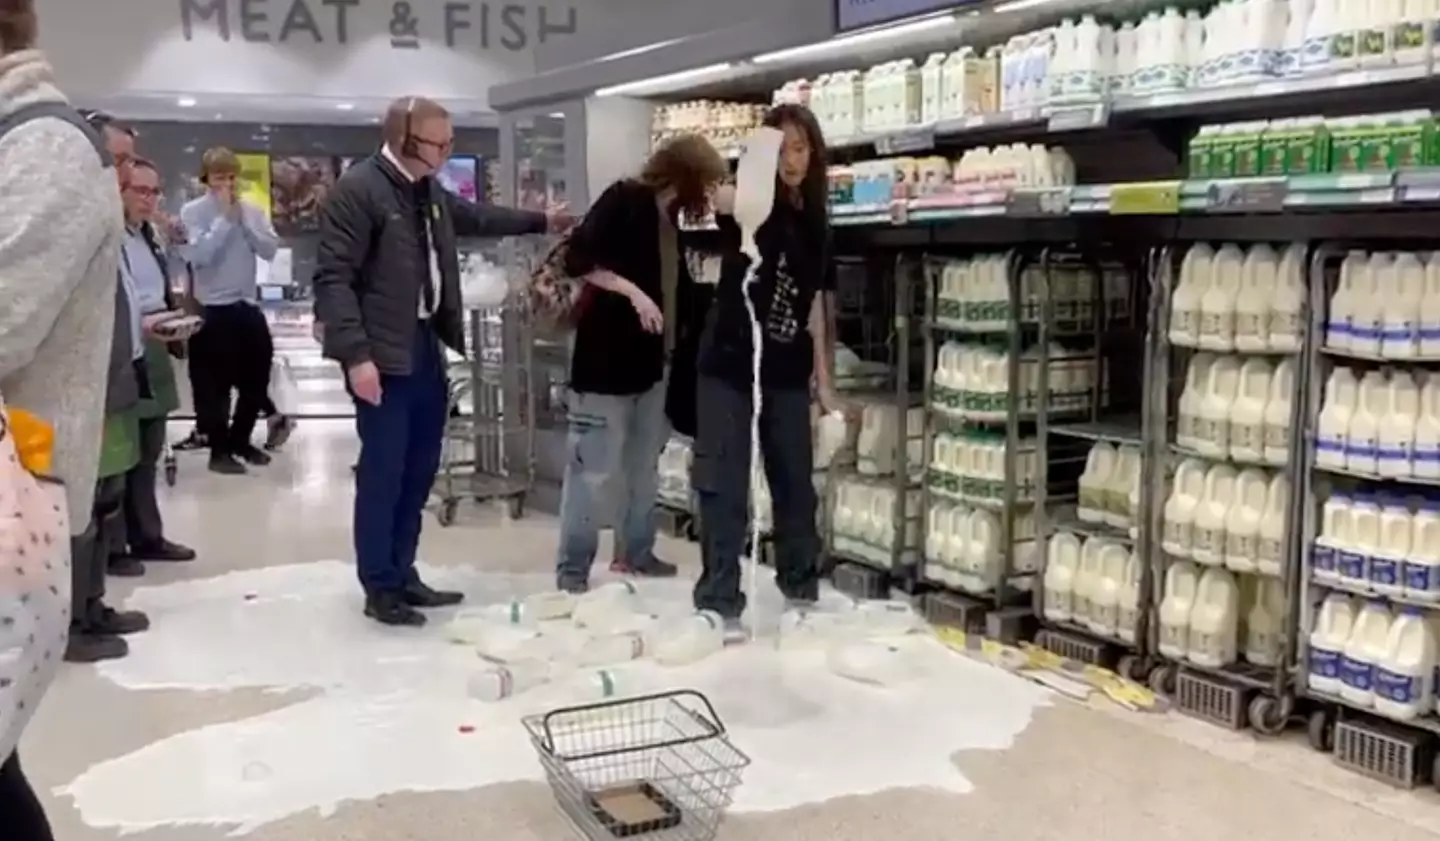 The activists chucked out milk at a shop in Edinburgh.